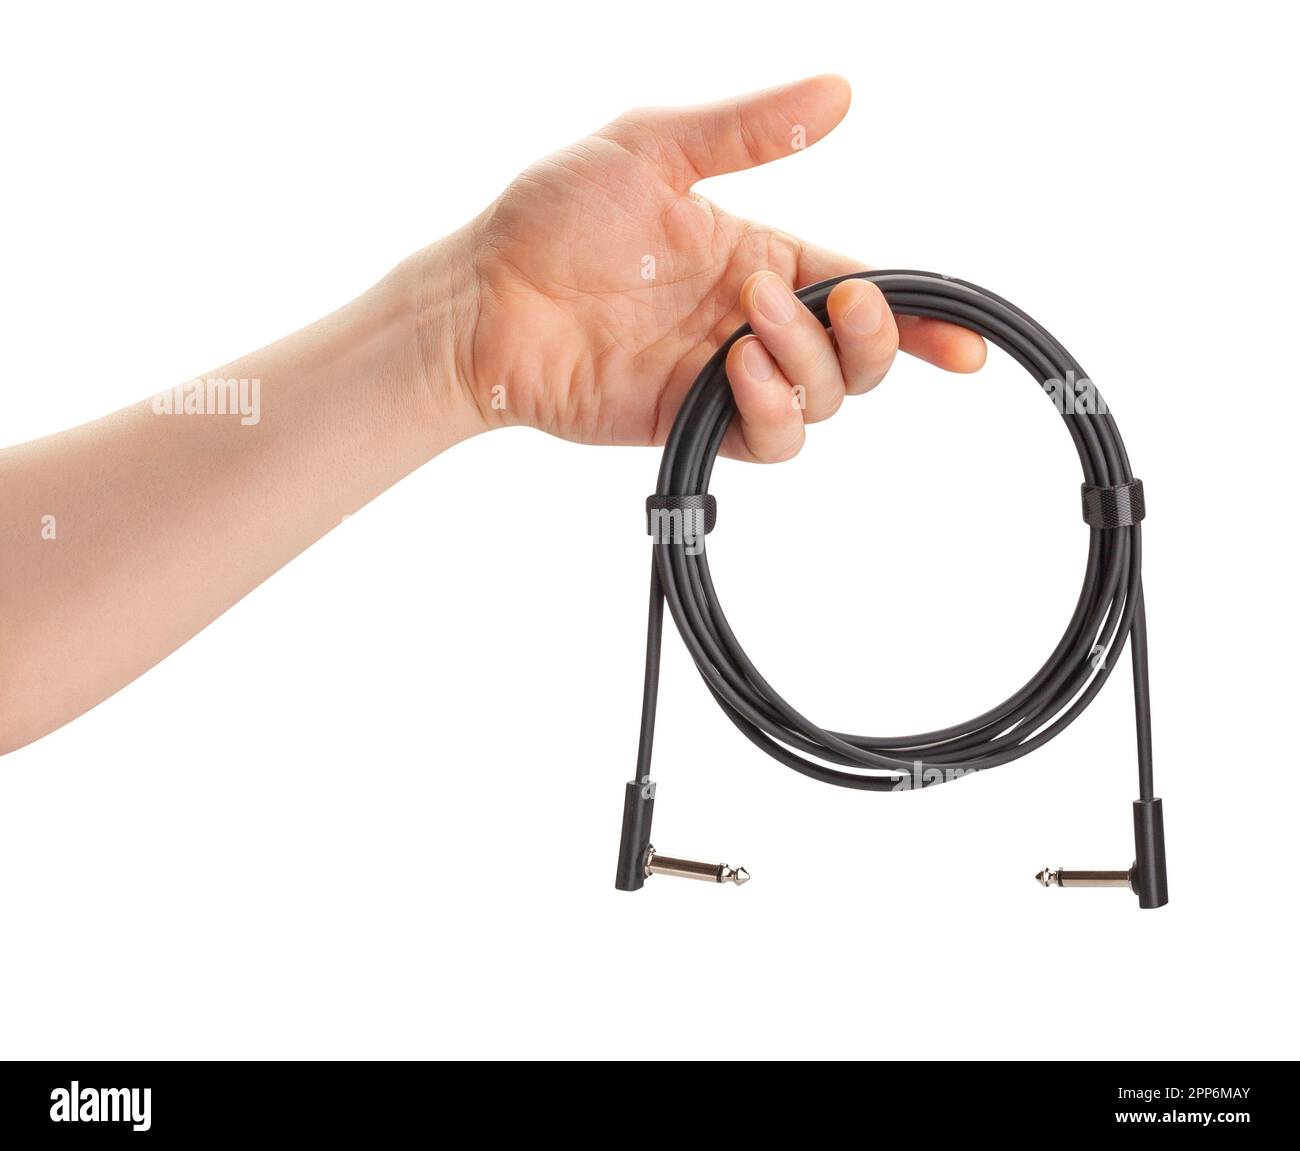 electric guitar cable in hand path isolated Stock Photo